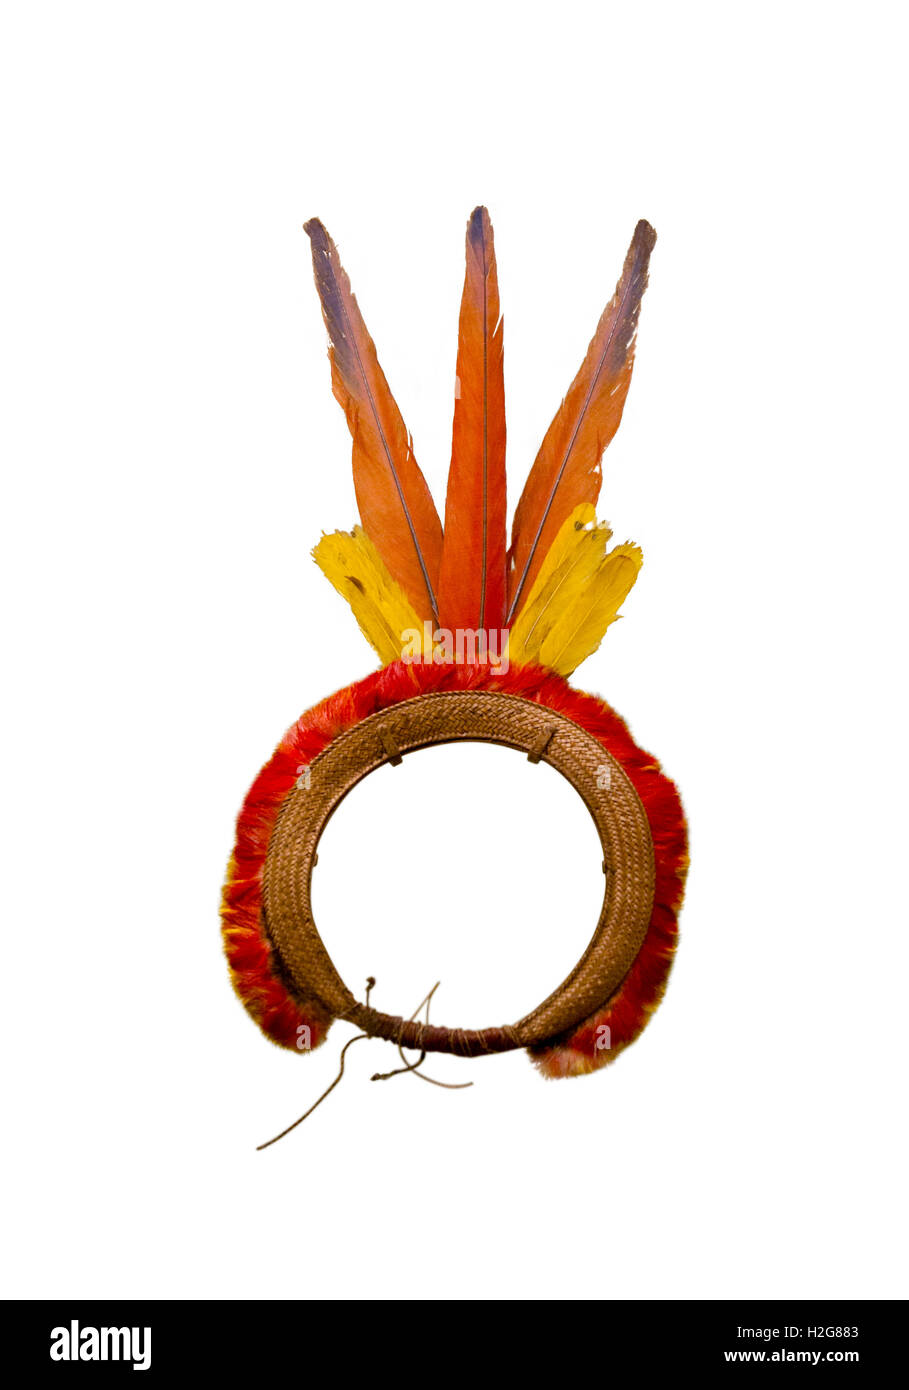 Tukanoan Headring Amazonas Brazil dating to around 1925 contains Macaw, Oropendola and Toucan feathers the combined colours repr Stock Photo